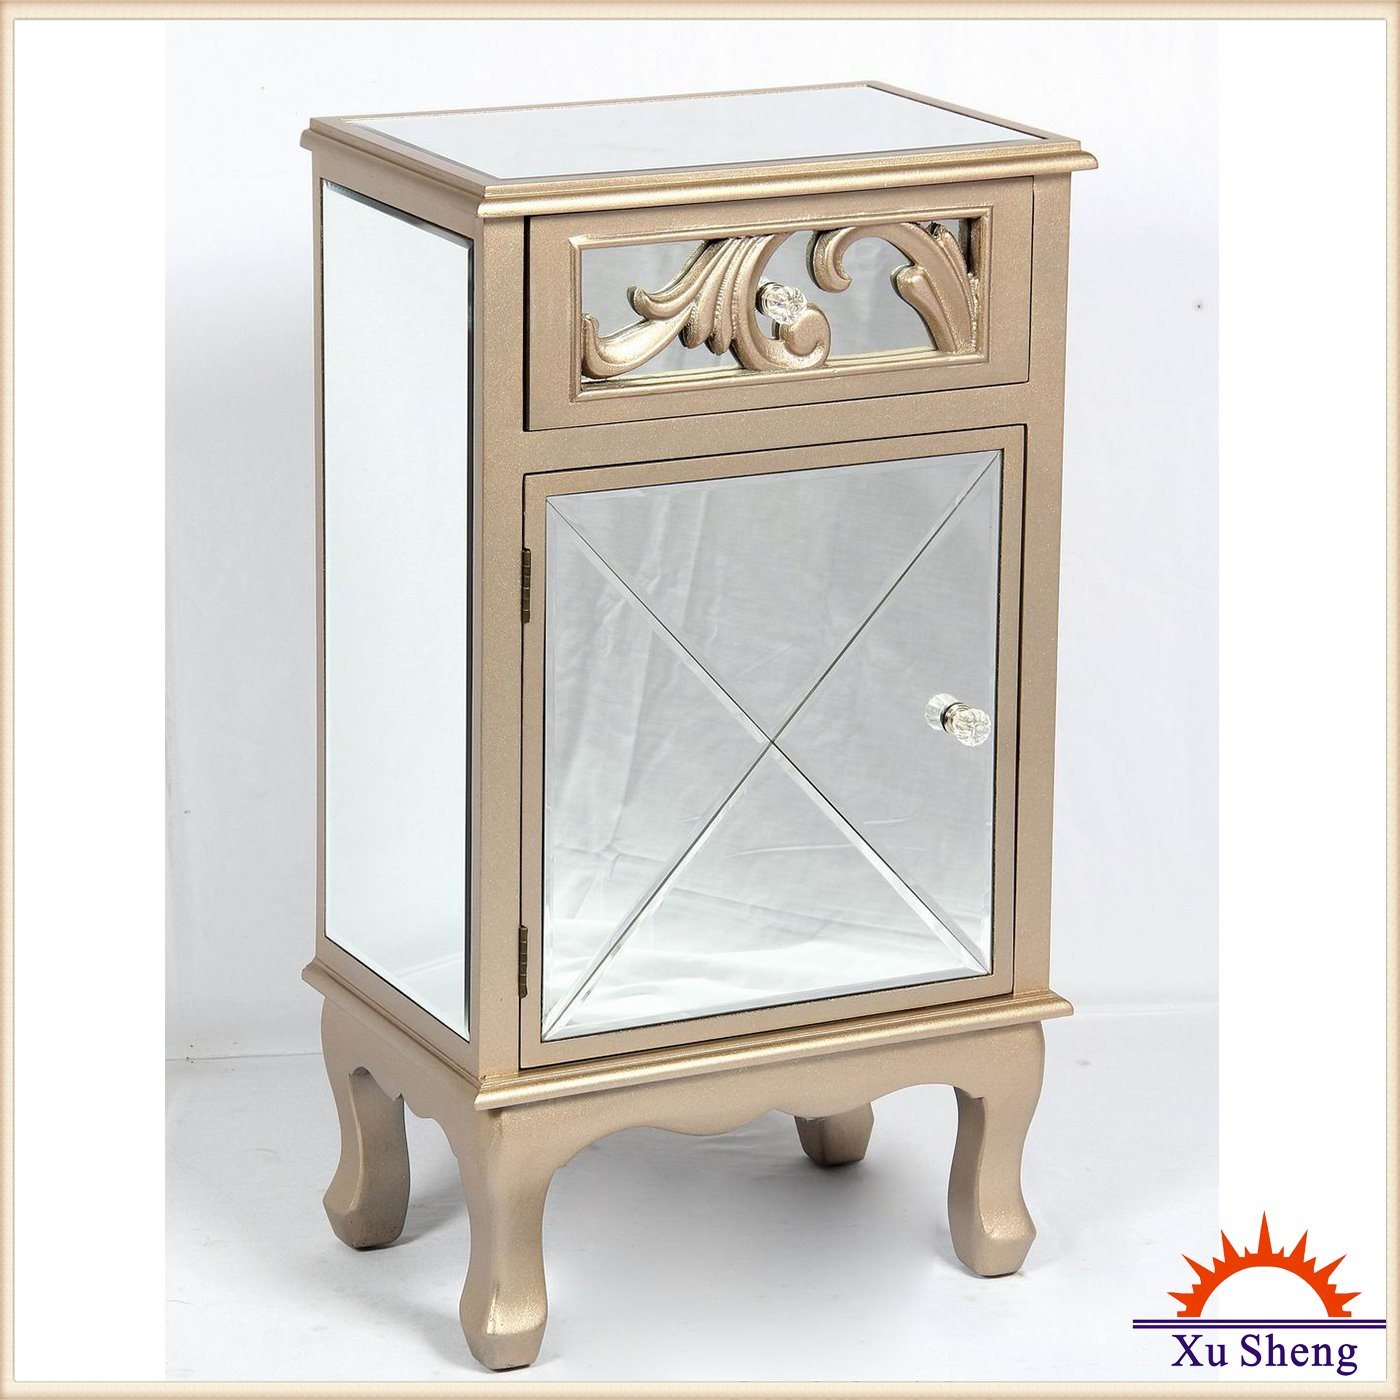 Home Furniture Accent Antique Wooden Mirrored Console for Living Room or Bedroom-Champagne